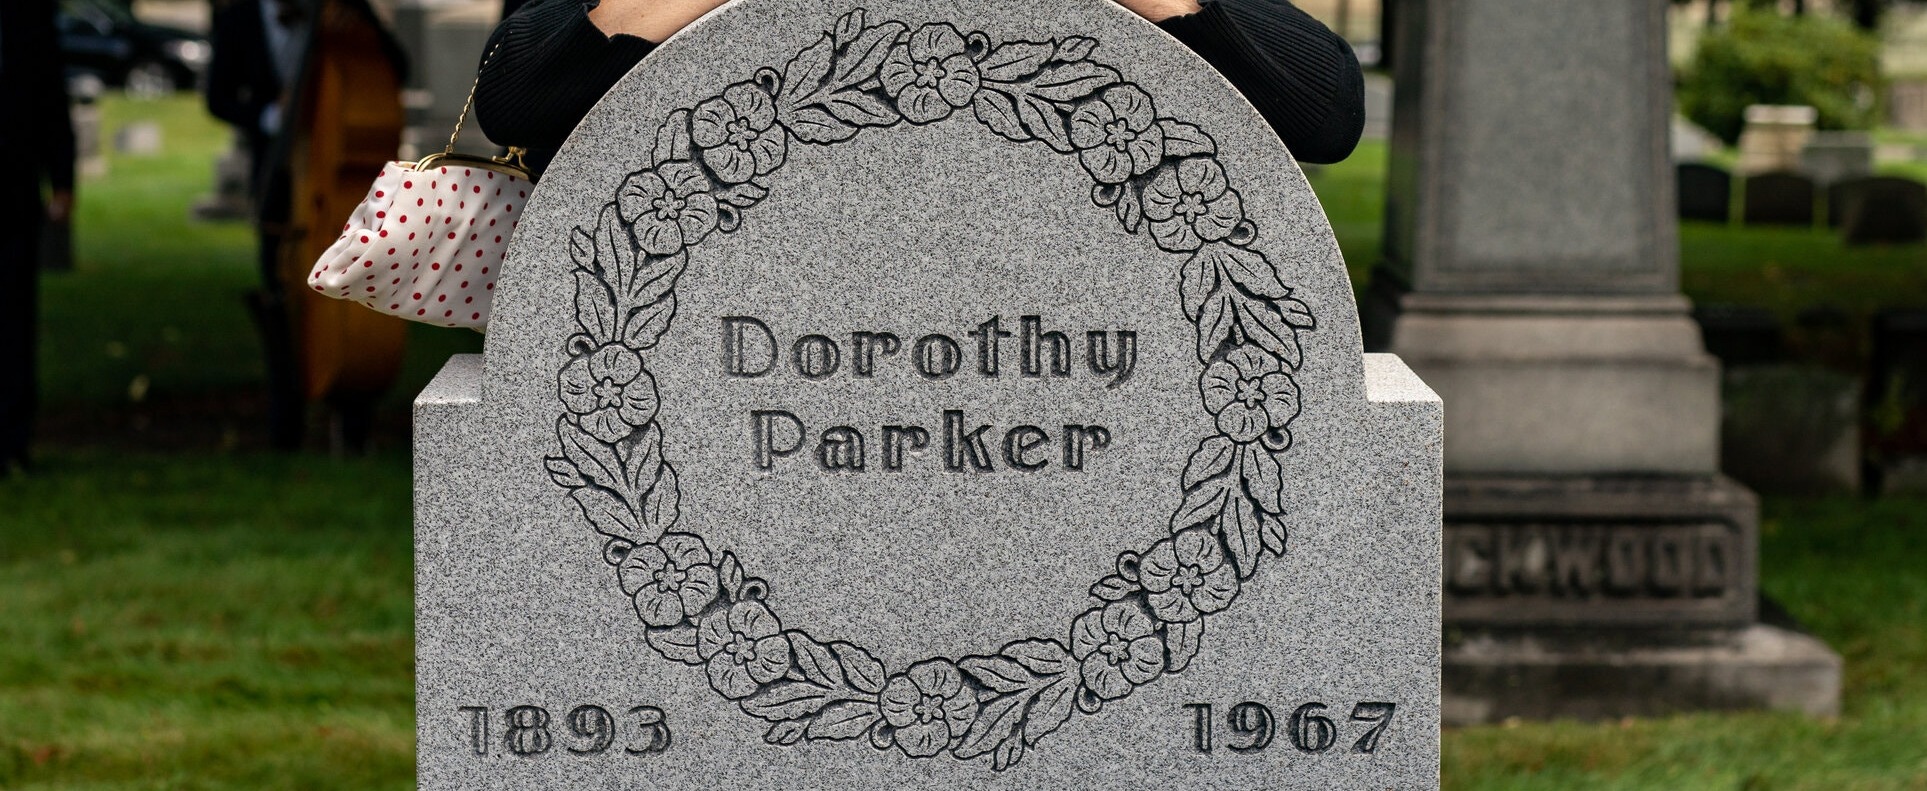 Dorothy Parker Finally Gets a Final Resting Place, 54 Years Late